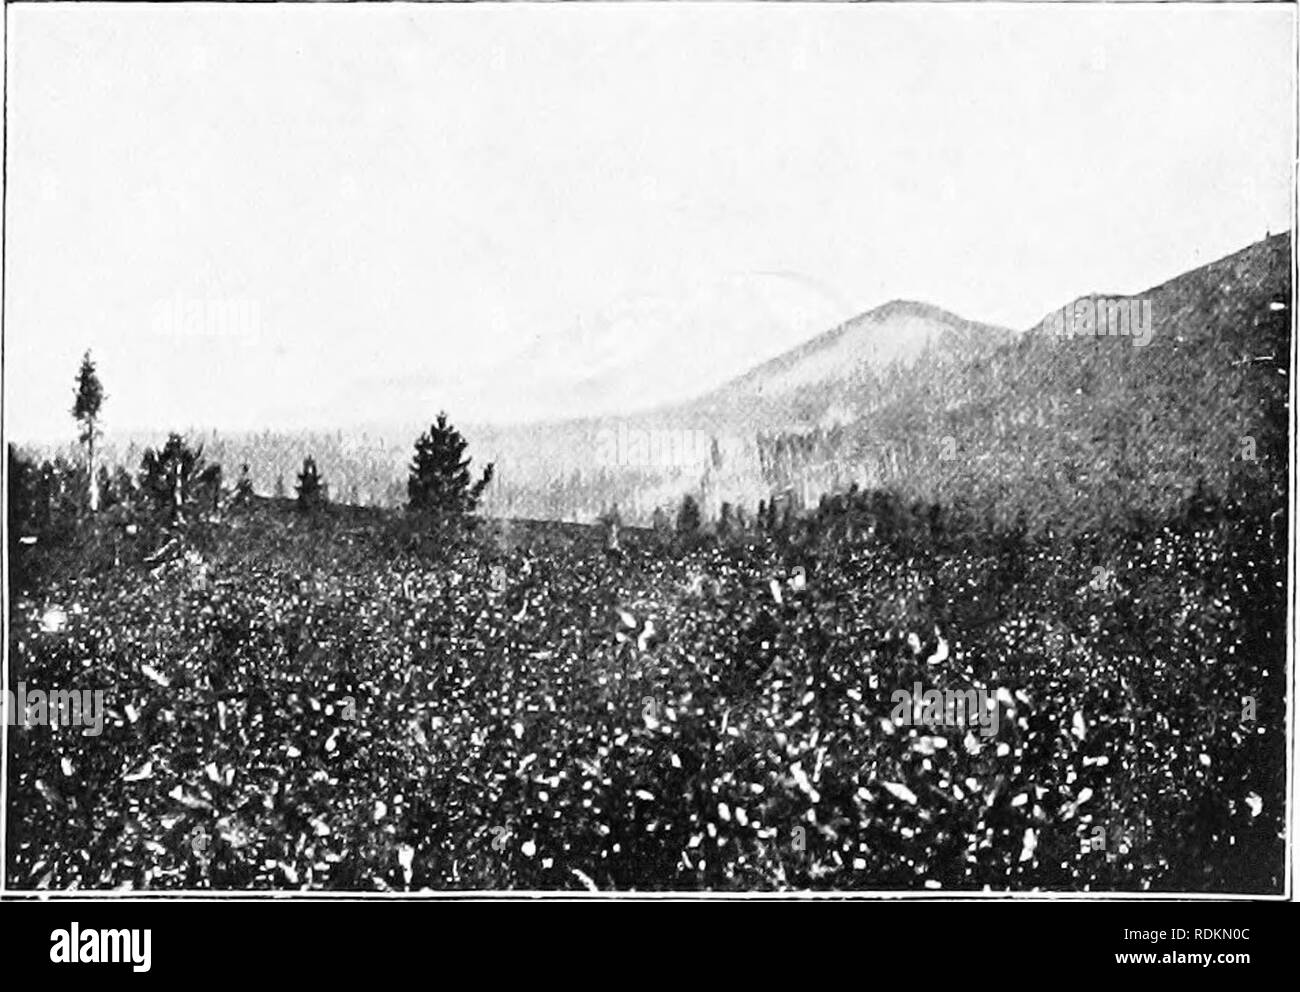 . Results of a biological survey of Mount Shasta, California. Natural history; Natural history. OCT., 1899.] PLANTS. Pyrola secunda Linn. Decidedly less eoniinon than /'. pictii, fir forest. 1.^)7 )iit like it found in the Shasta Pterospora andromedae Nutt. Pinedrops Found in the dry woods along the border between the (Janadiaii and Transition zones. (Identified by Professor Greene.) Pleuricospora fimbriolata Gray. Collected at Wagon Camp by Miss Wilkins. (Identified by F. V. Coville.) Sarcodes sanguinea Torr. Snow Plant. This handsome plant i.s reported as common on the forested slopes of Sha Stock Photo